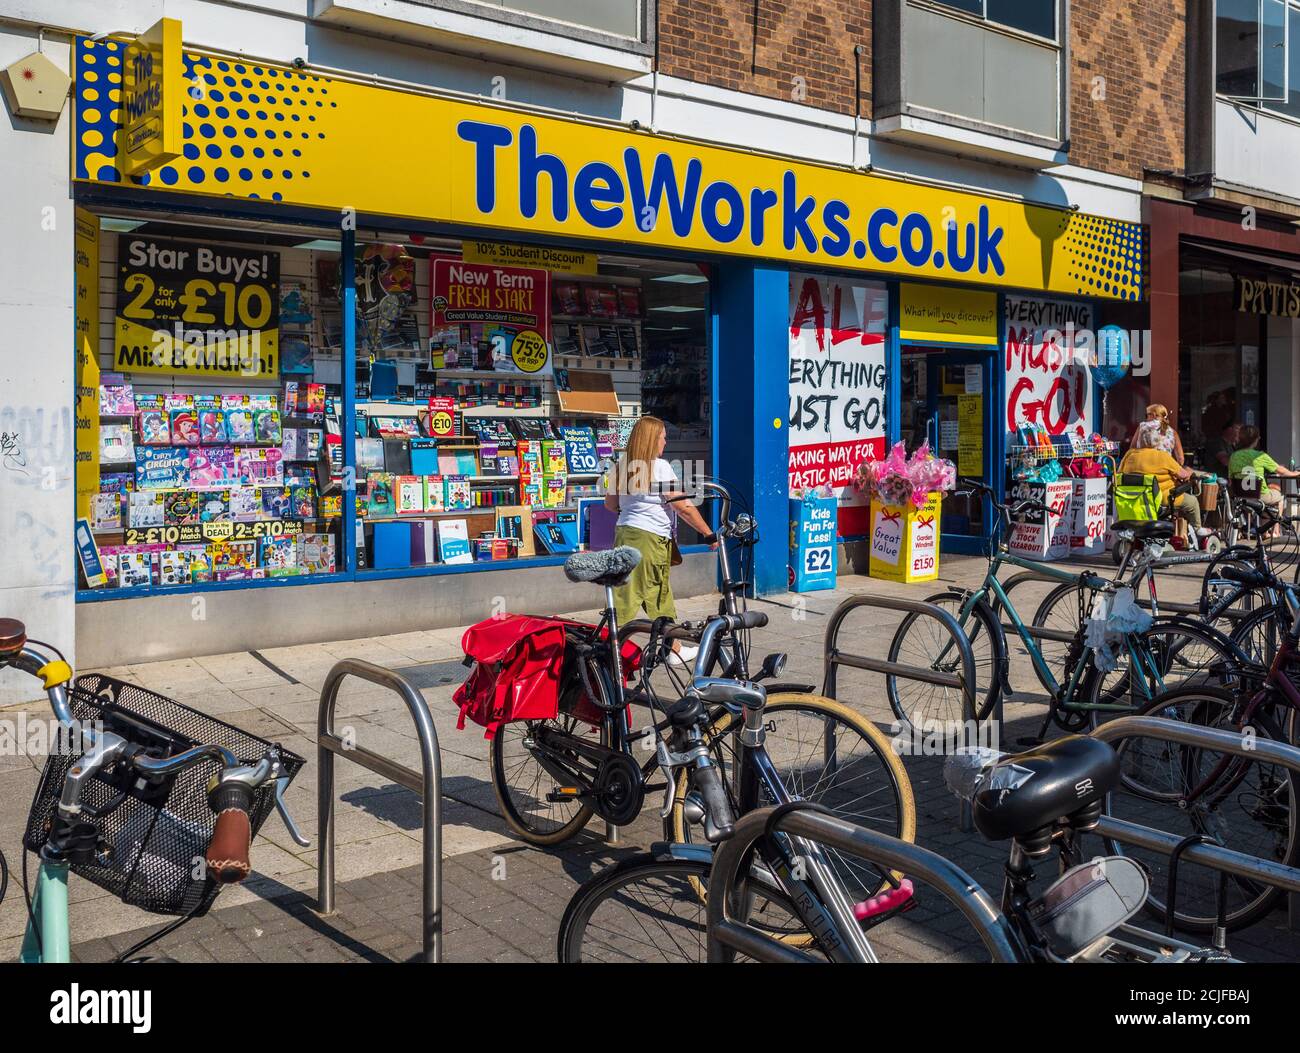 The Works discount book and gift store. TheWorks is a retailer of gifts, arts, crafts, toys, books and stationery in the UK. The Works Shop. Stock Photo